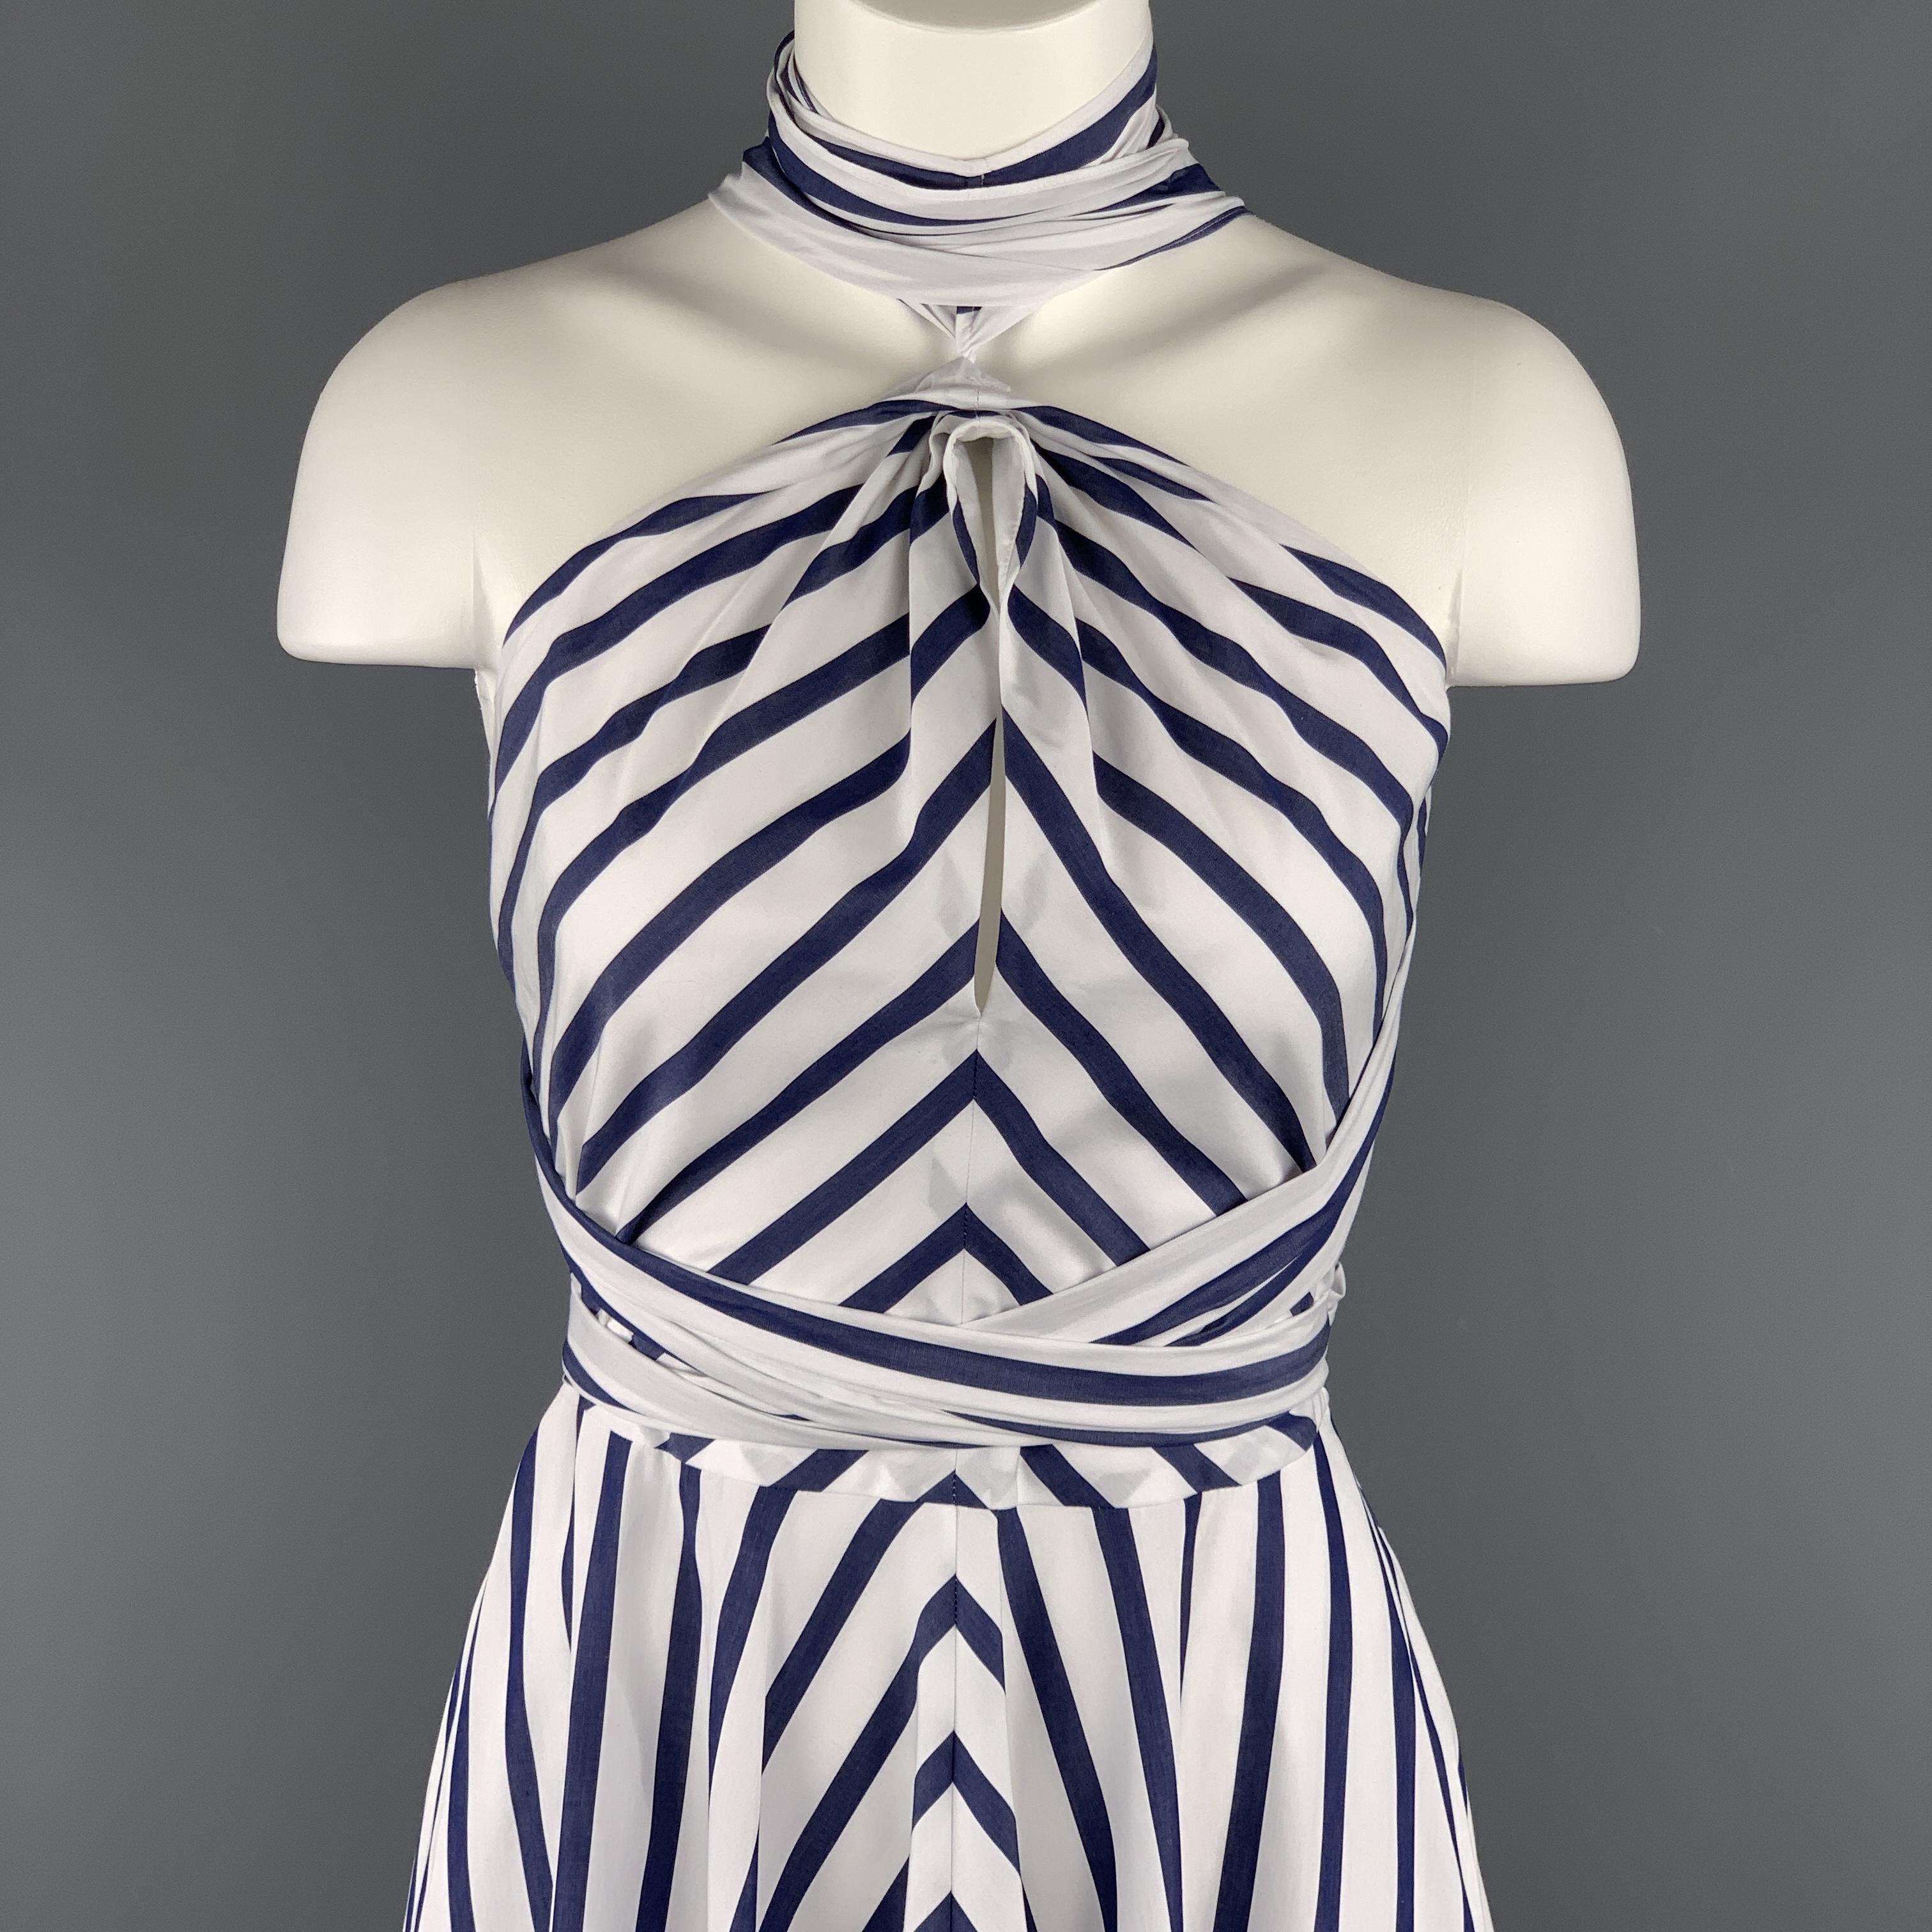 CAROLINE HERRERA sun dress comes in white and blue striped cotton with a halter cut bodice with gathered cutout, flared skirt, and long wrap neck tie. 

Excellent Pre-Owned Condition.
Marked: 0

Measurements:

Bust: 34 in.
Waist: 28 in.
Hip: 34